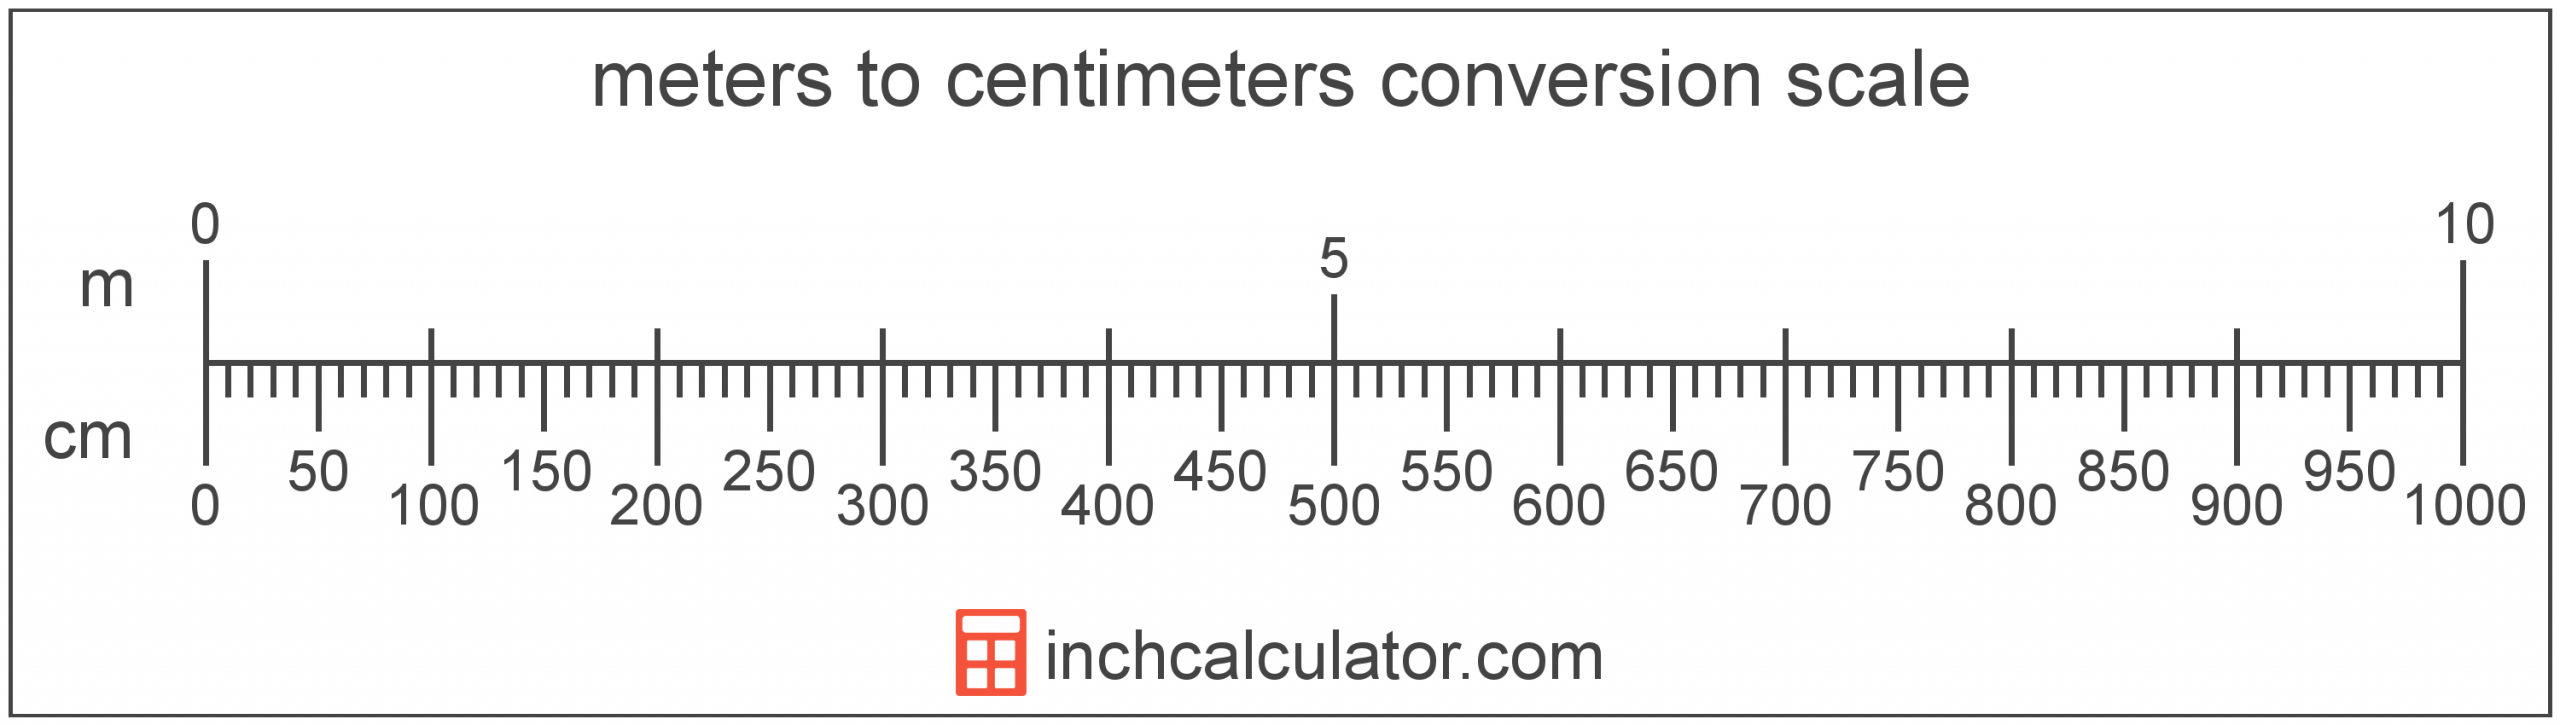 Centimeters To Meters Conversion (Cm To M) - Inch Calculator